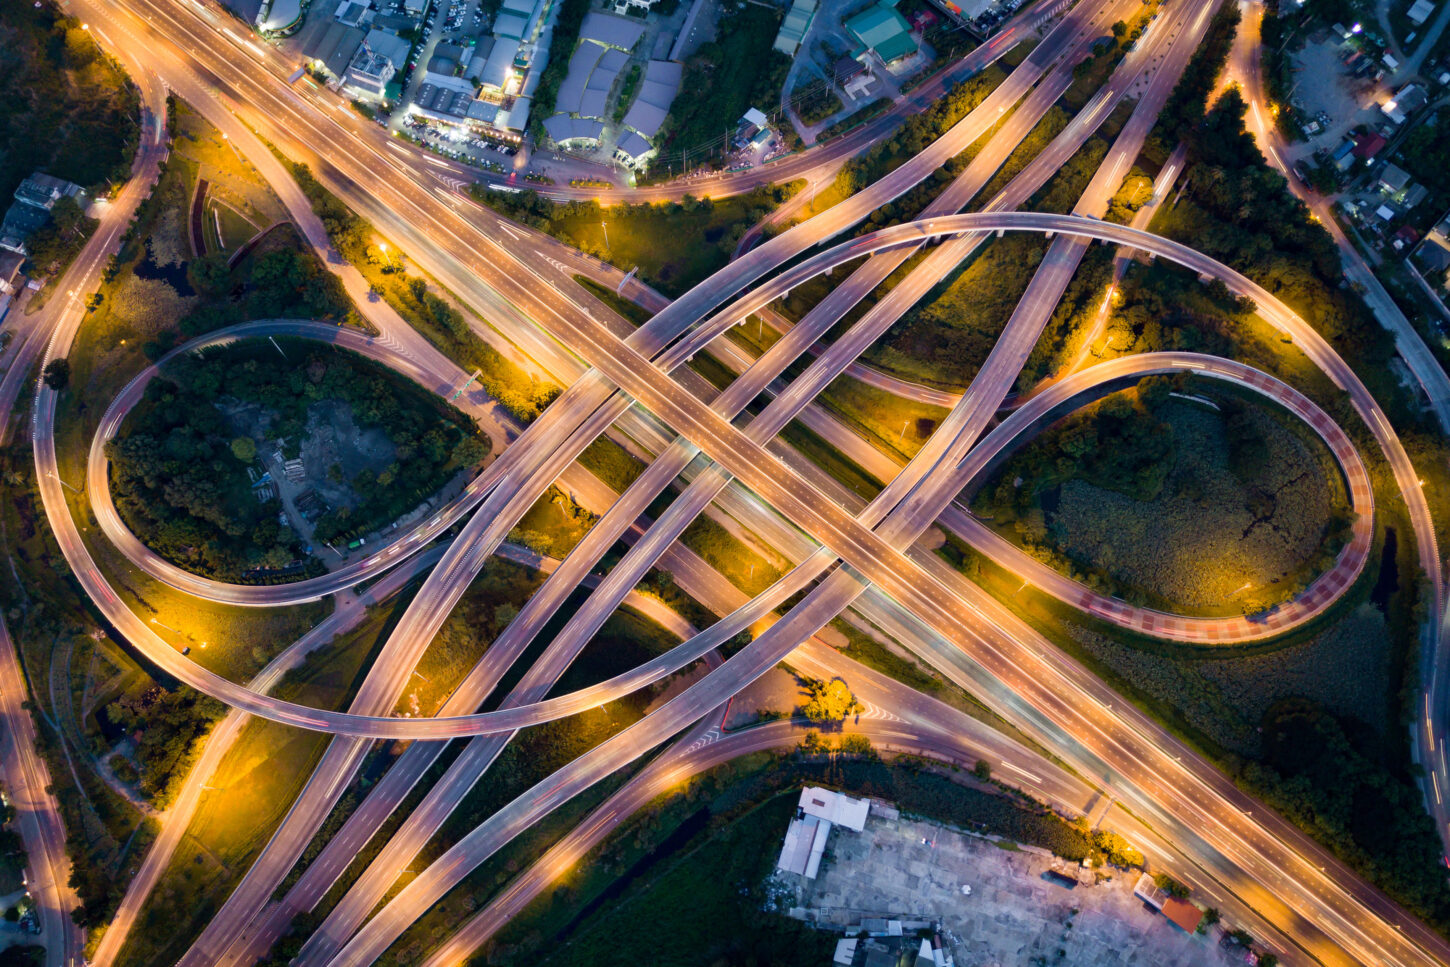 aerial-view-of-illuminated-road-interchange-or-highway-intersection-with-busy-urban-traffic-speeding-on-the-road-at-night-junction-network-of-transportation-taken-by-drone